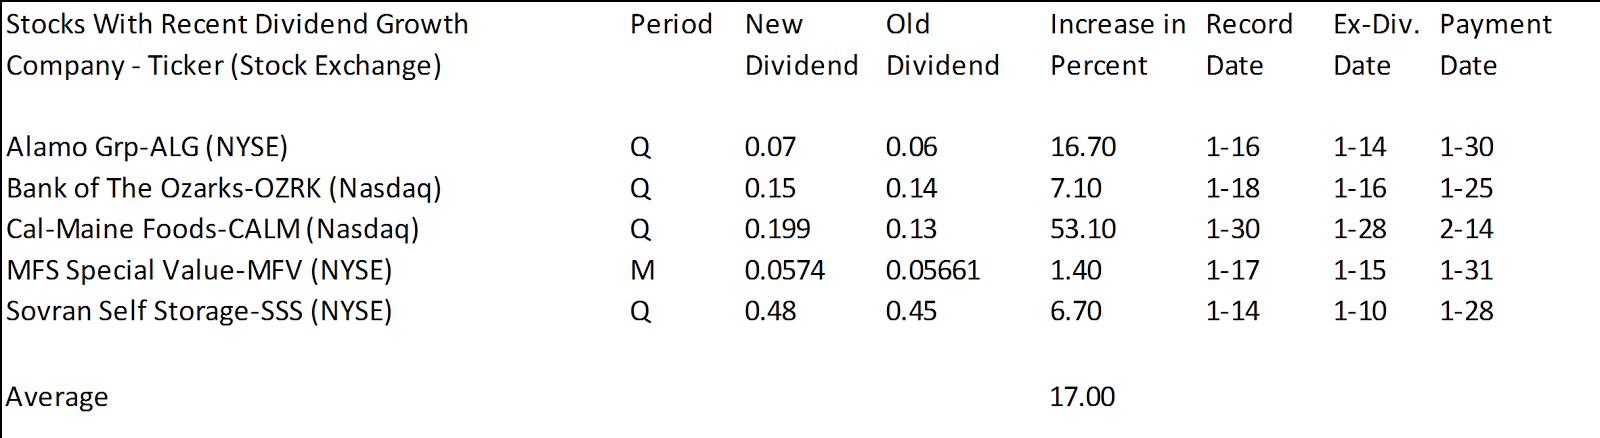 Stocks with Dividend Growth From Last Week